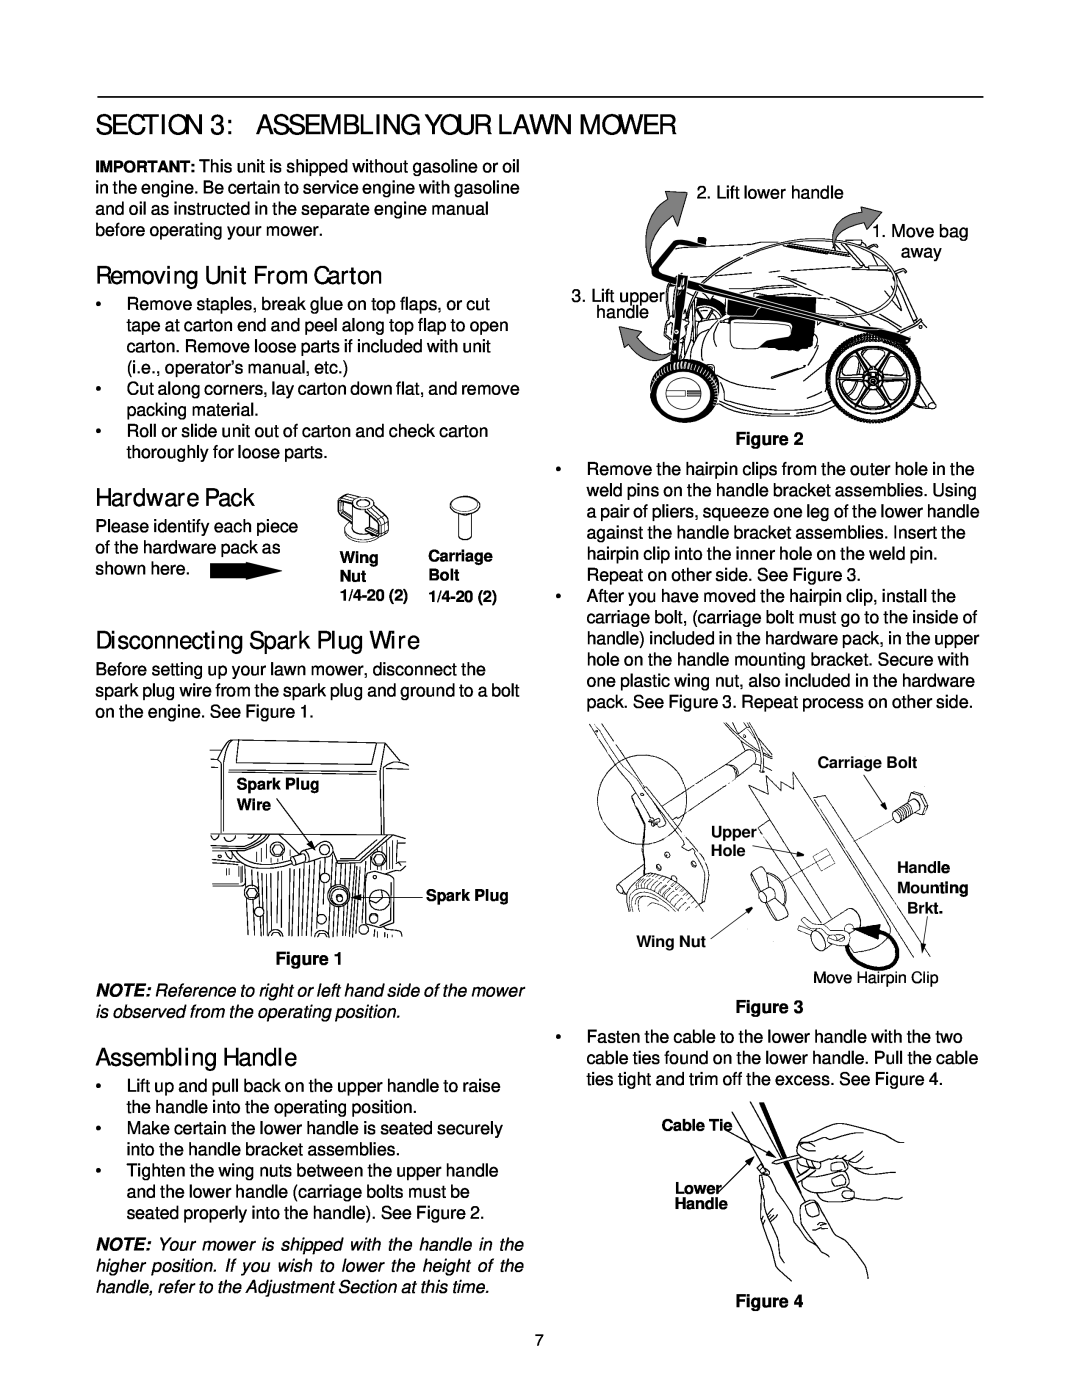 Yard-Man 589 manual Assembling Your Lawn Mower, Removing Unit From Carton, Hardware Pack, Disconnecting Spark Plug Wire 